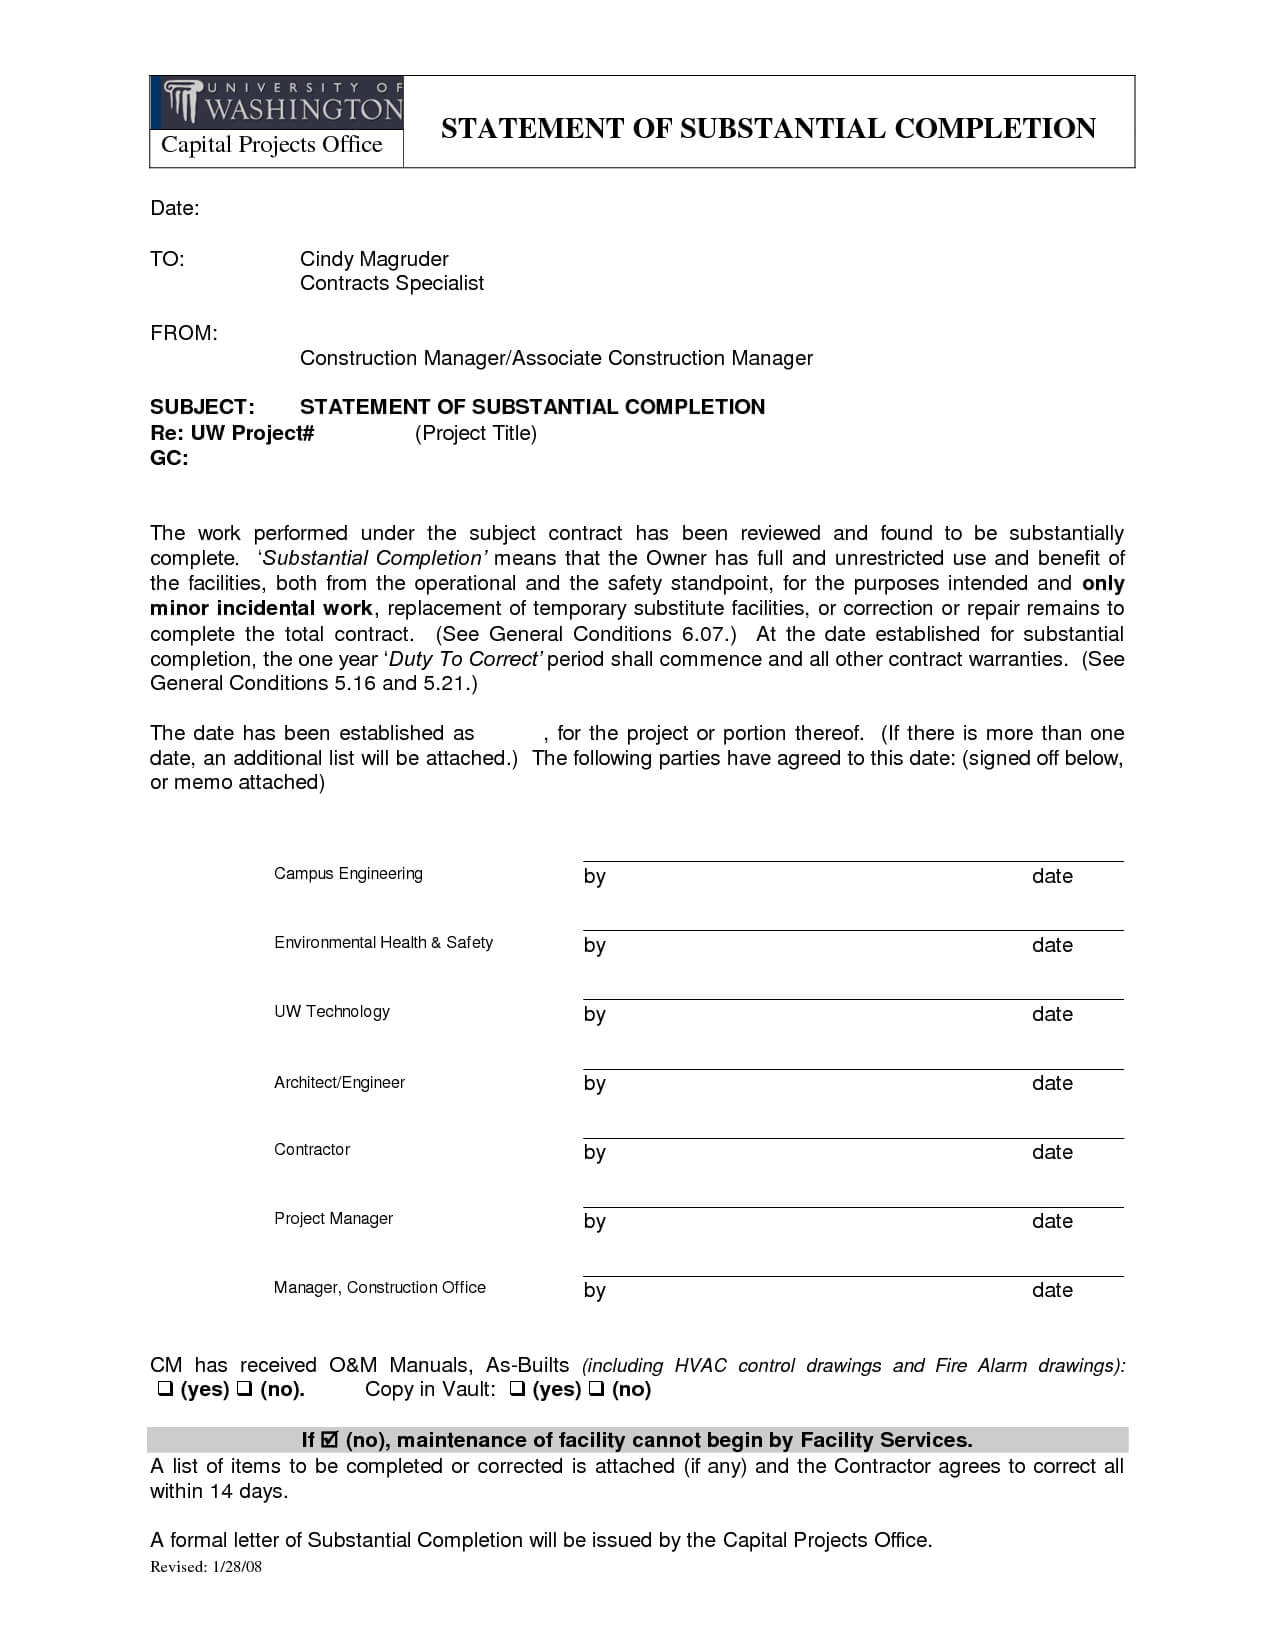 Letter Of Substantial Completion – Free Printable Documents Throughout Certificate Of Substantial Completion Template